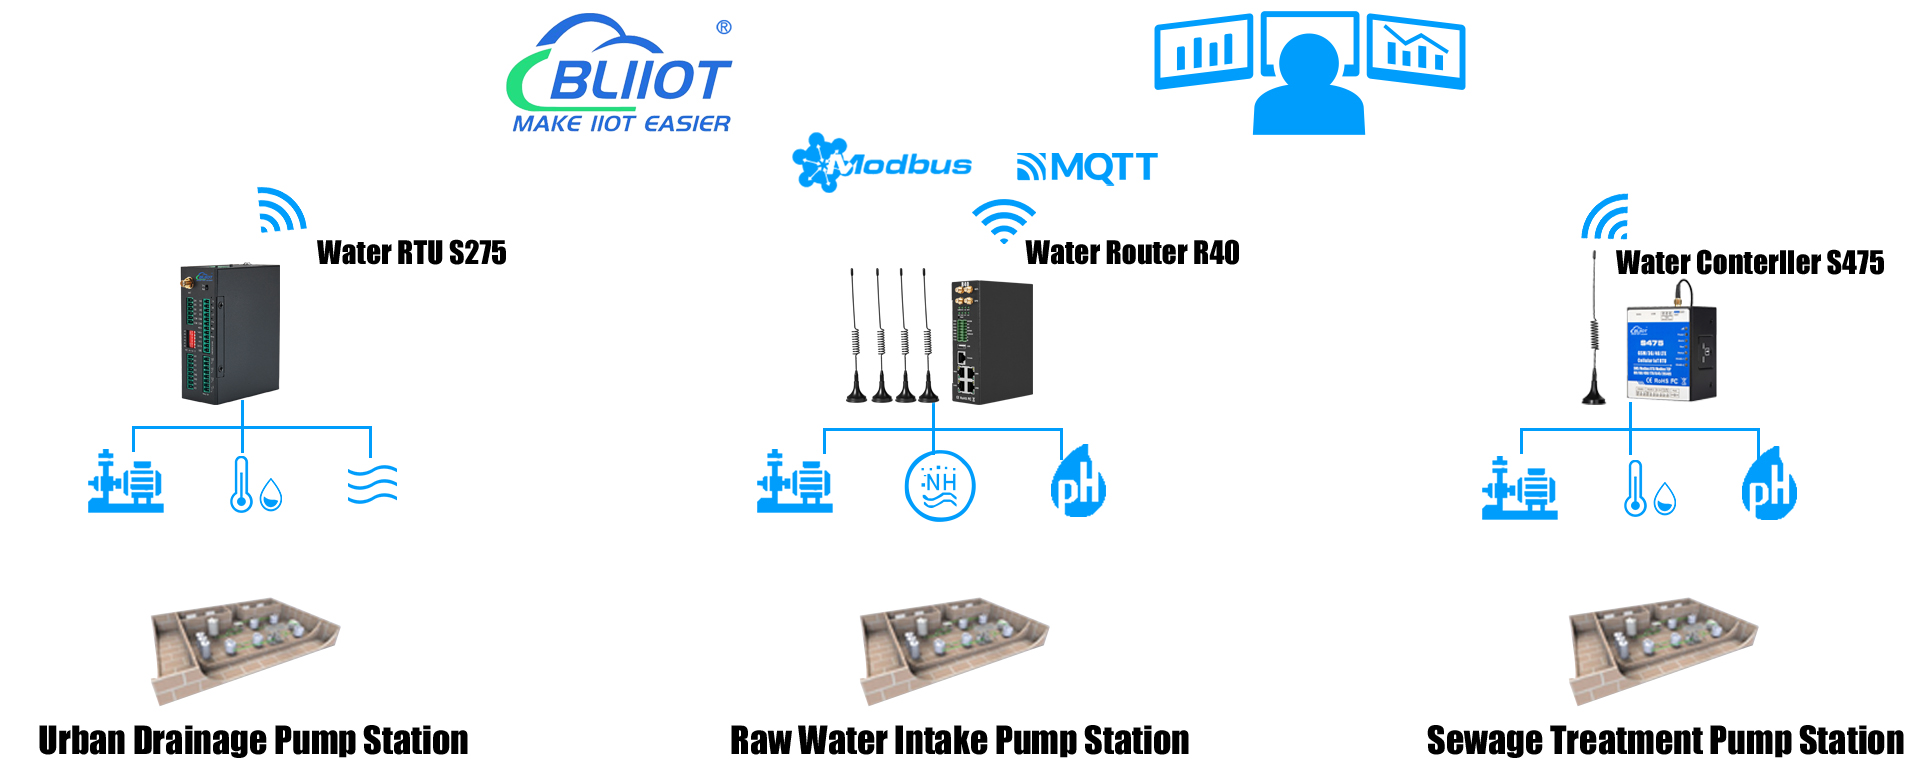 BLIIoT Remote Water Pump Monitoring and Control System